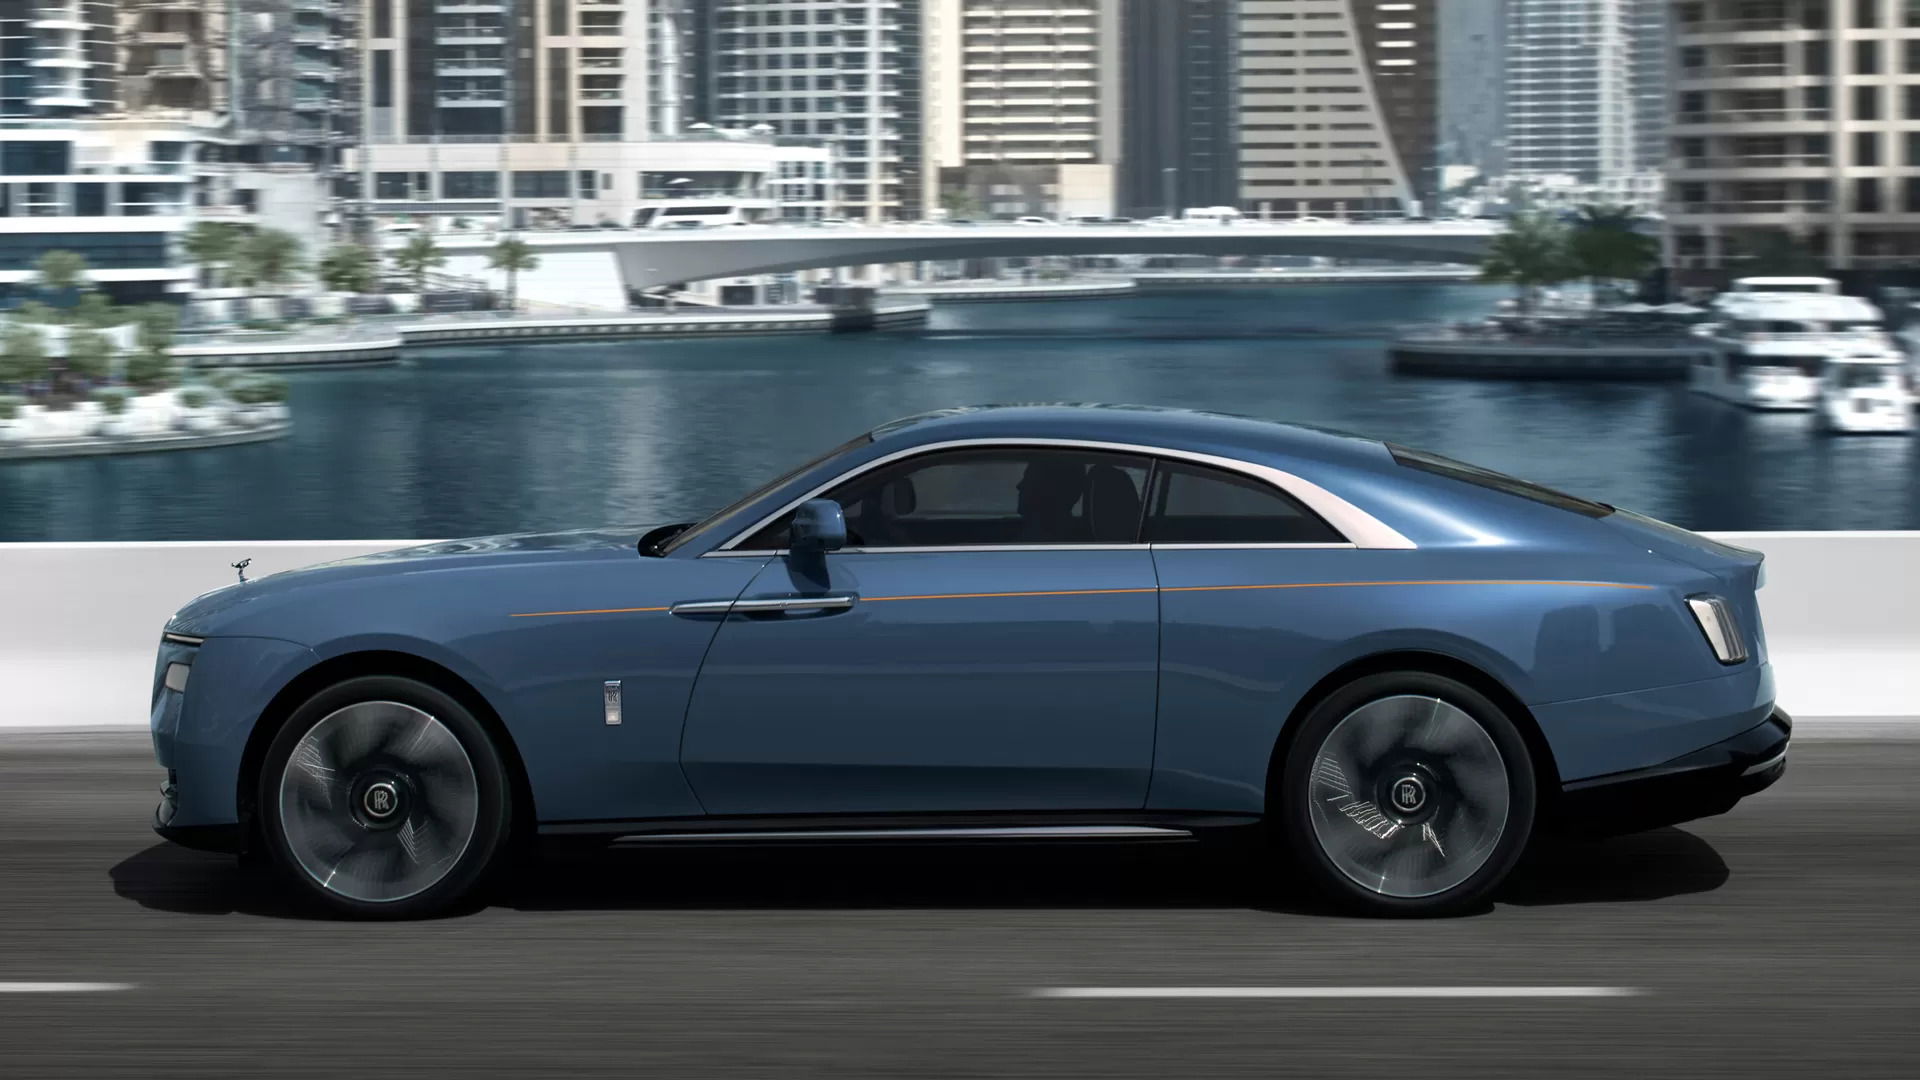 How much will the 2024 Rolls-Royce Spectre cost?